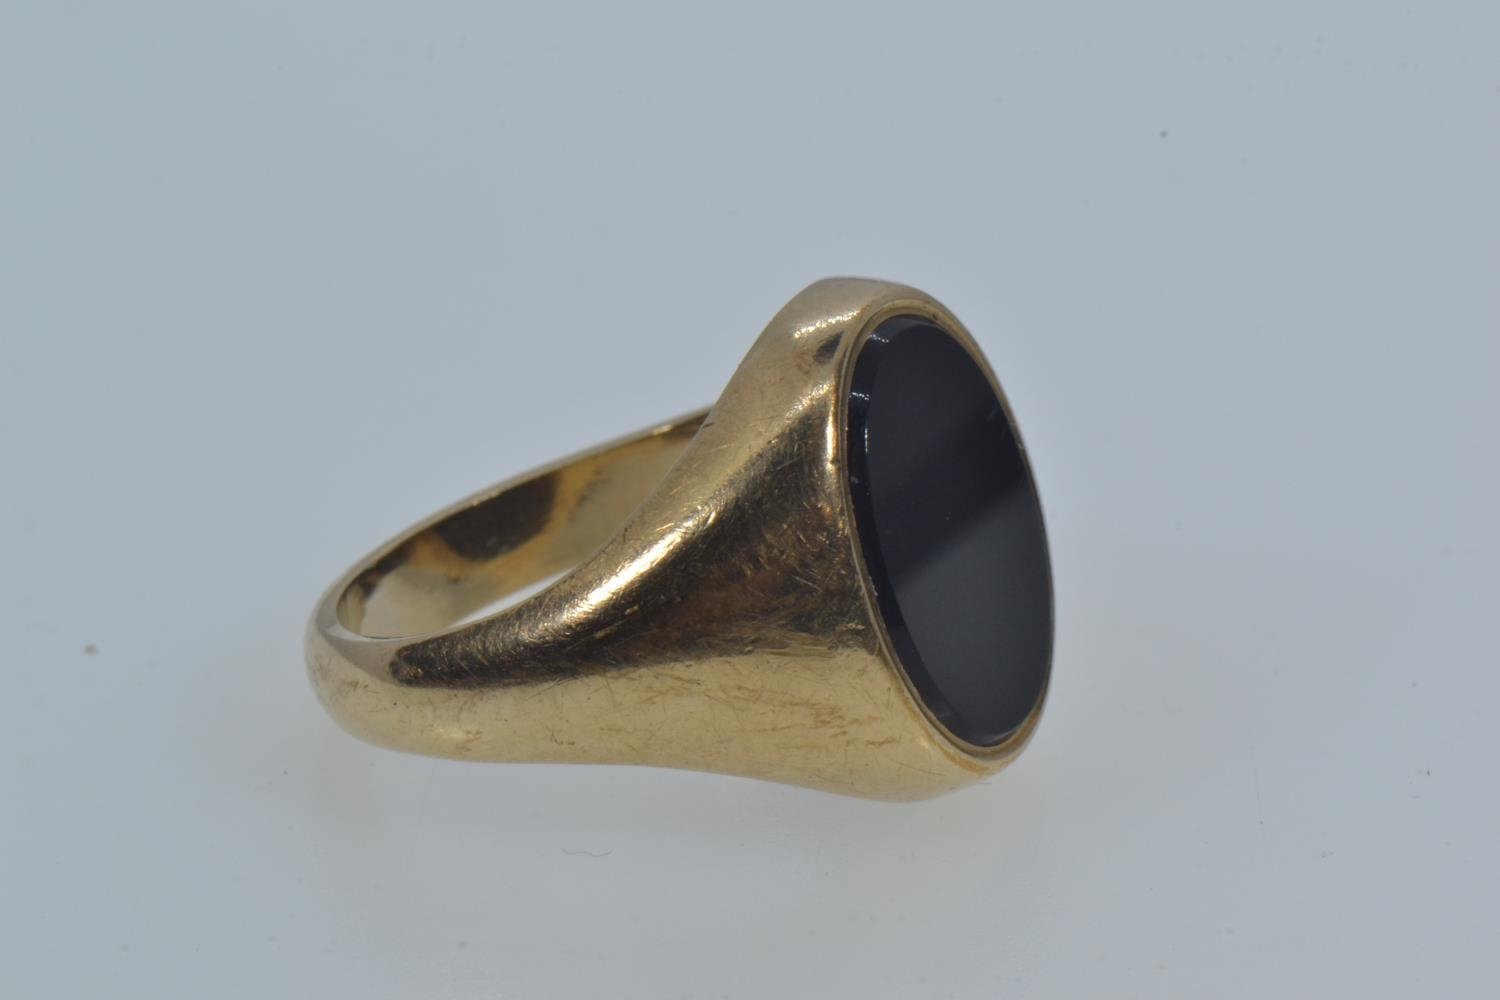 9ct gold & black onyx signet ring, hallmarked Birmingham 1977, size V, gross weight 10.95 grams  - Image 4 of 5